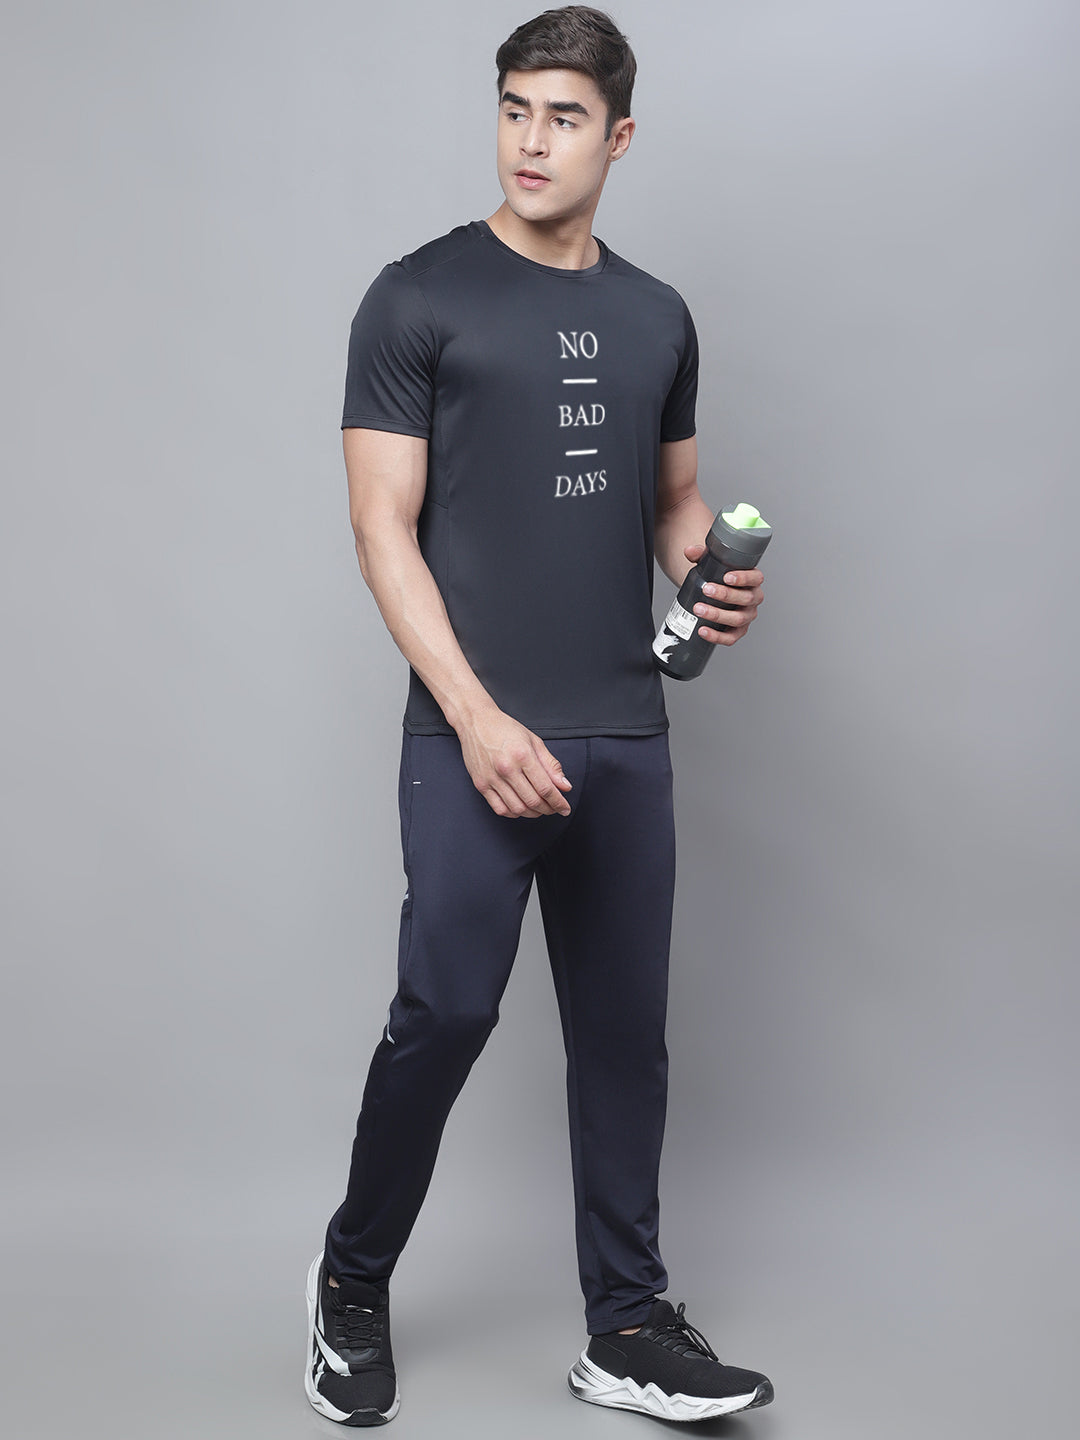 Sports Swift Dry Uv Protection Gym T-Shirt - Friskers